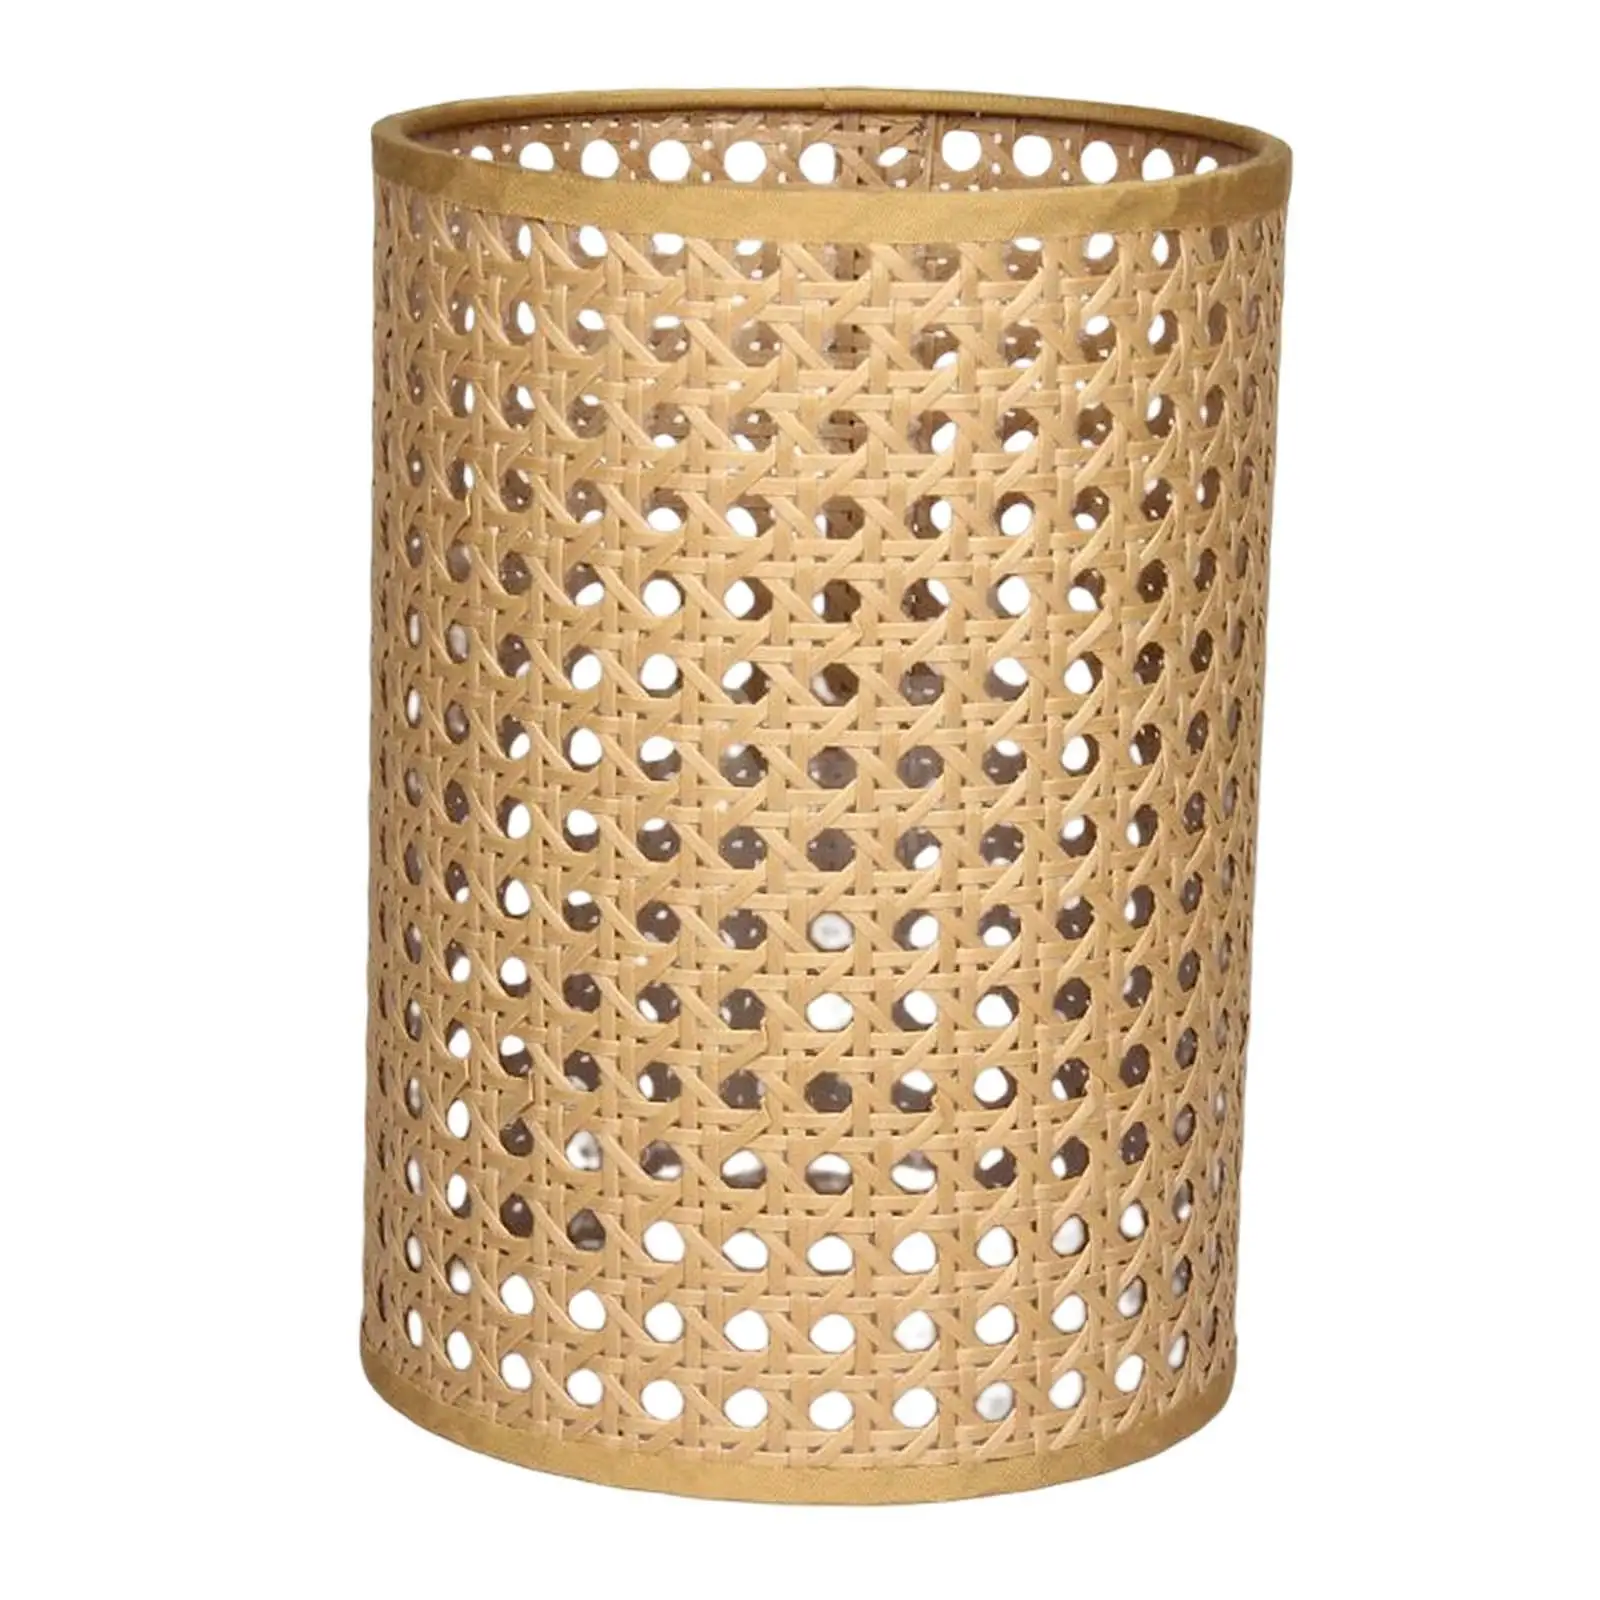 Classic Rattan Lamp Shade Pendant Light Cover for Home Living Room Bedroom